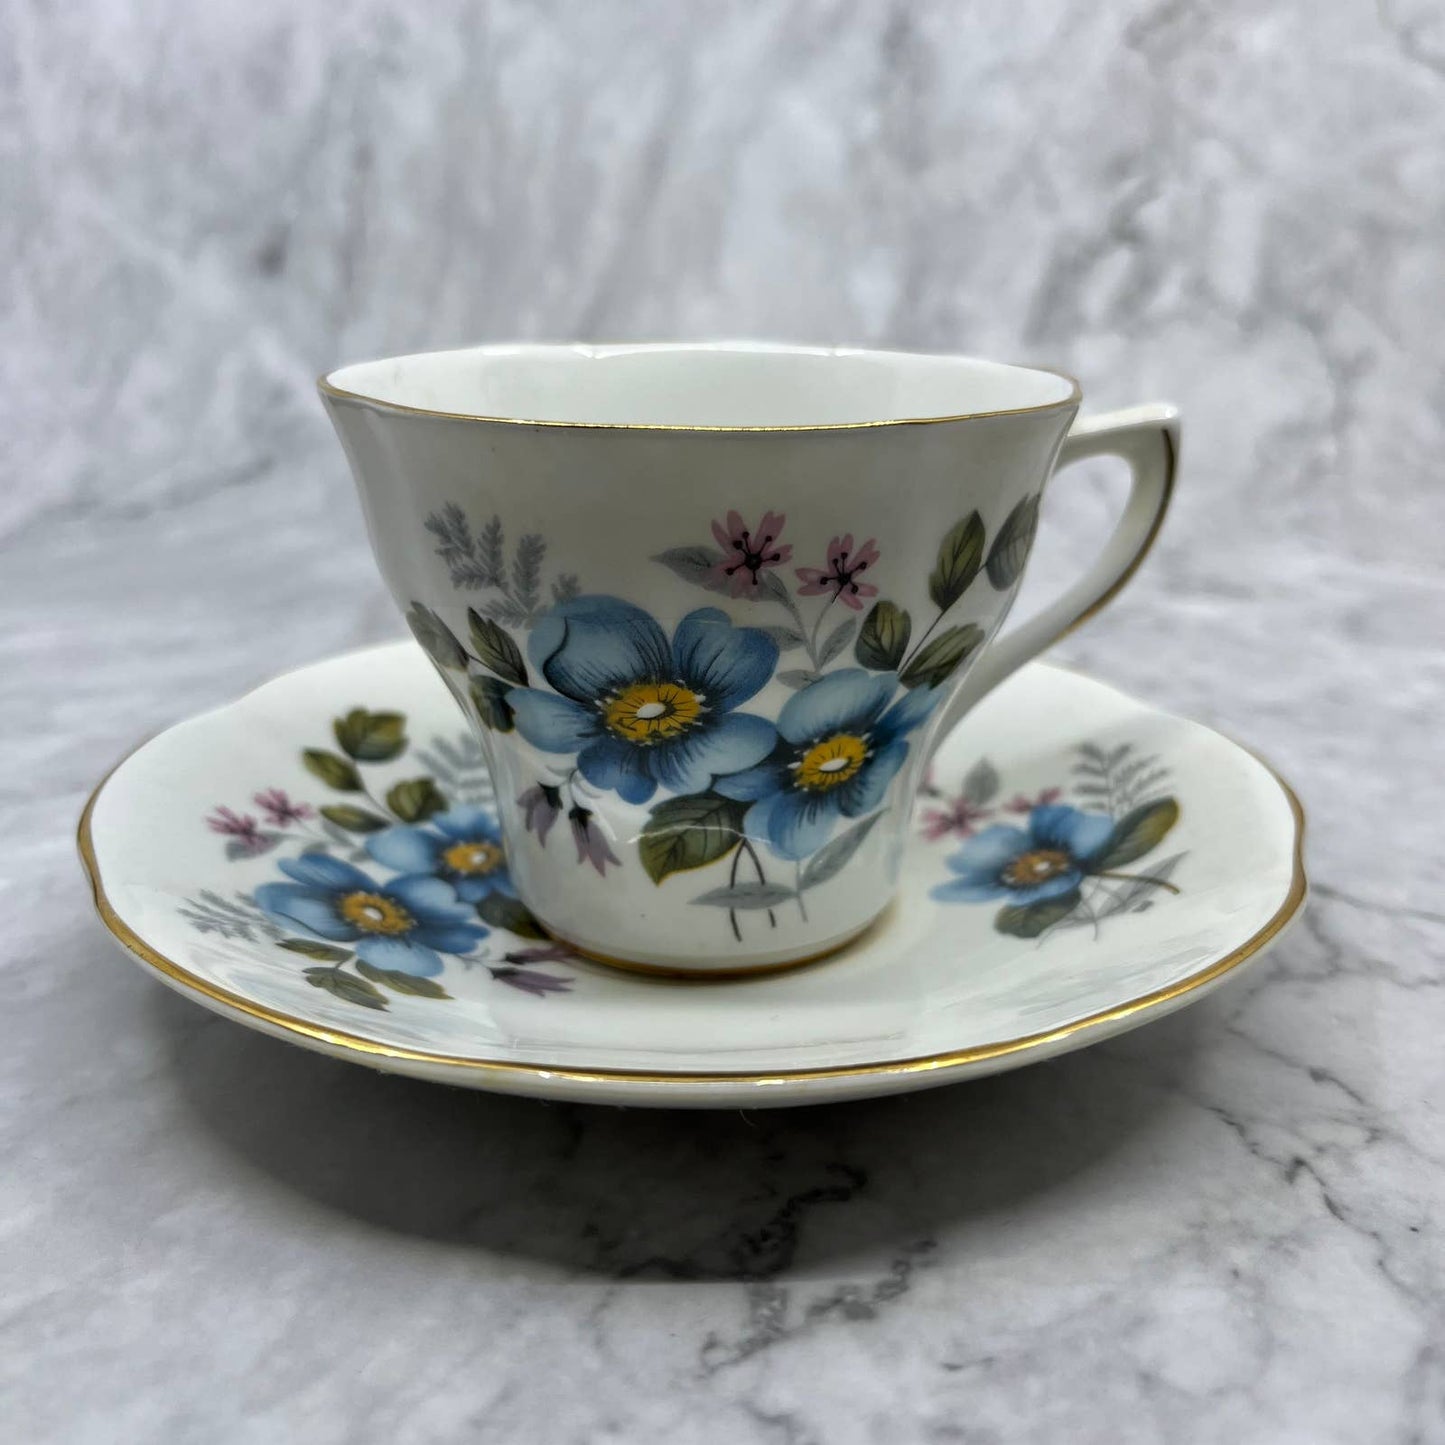 Vintage Royal Dover Bone China Cup & Saucer Blue Flowers, Made in England TA7